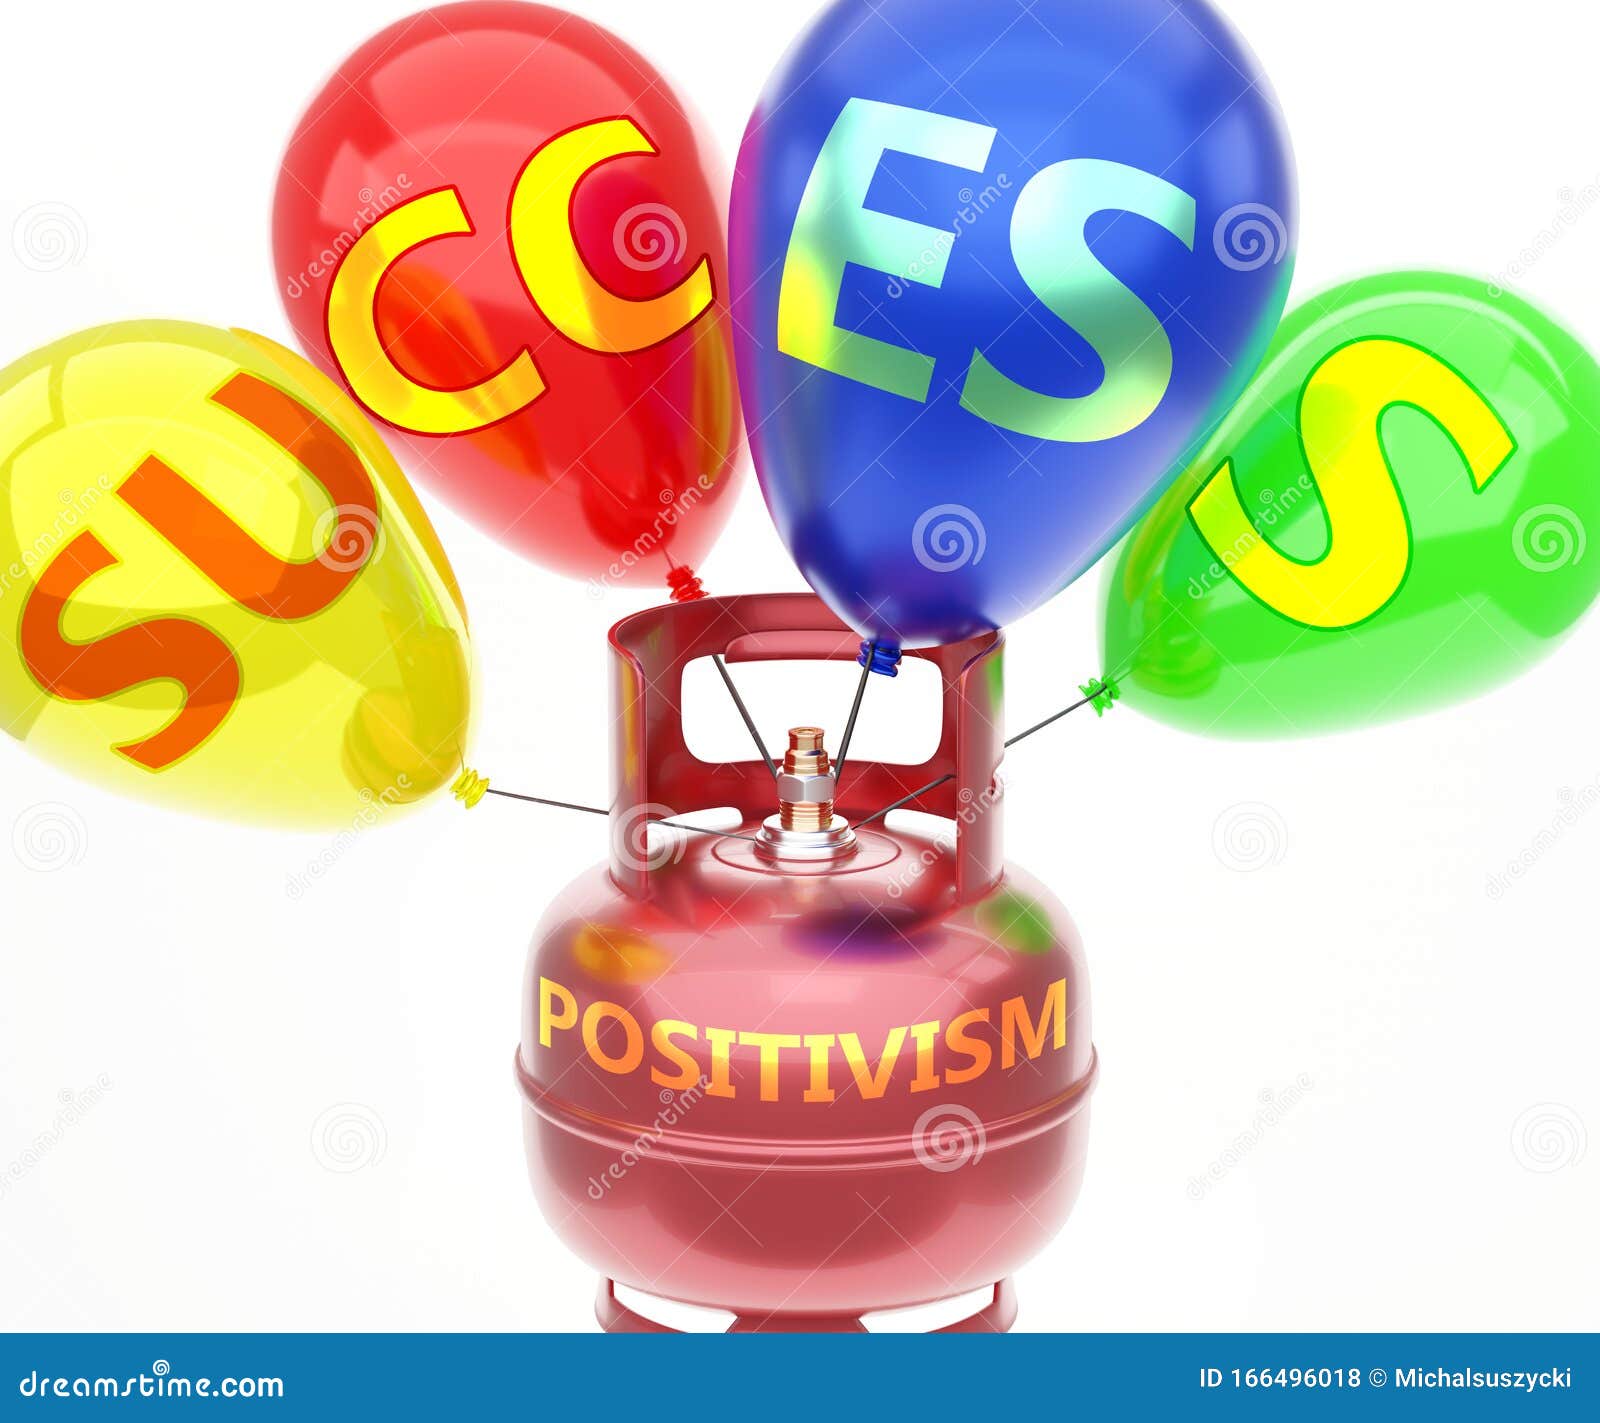 positivism and success - pictured as word positivism on a fuel tank and balloons, to ize that positivism achieve success and